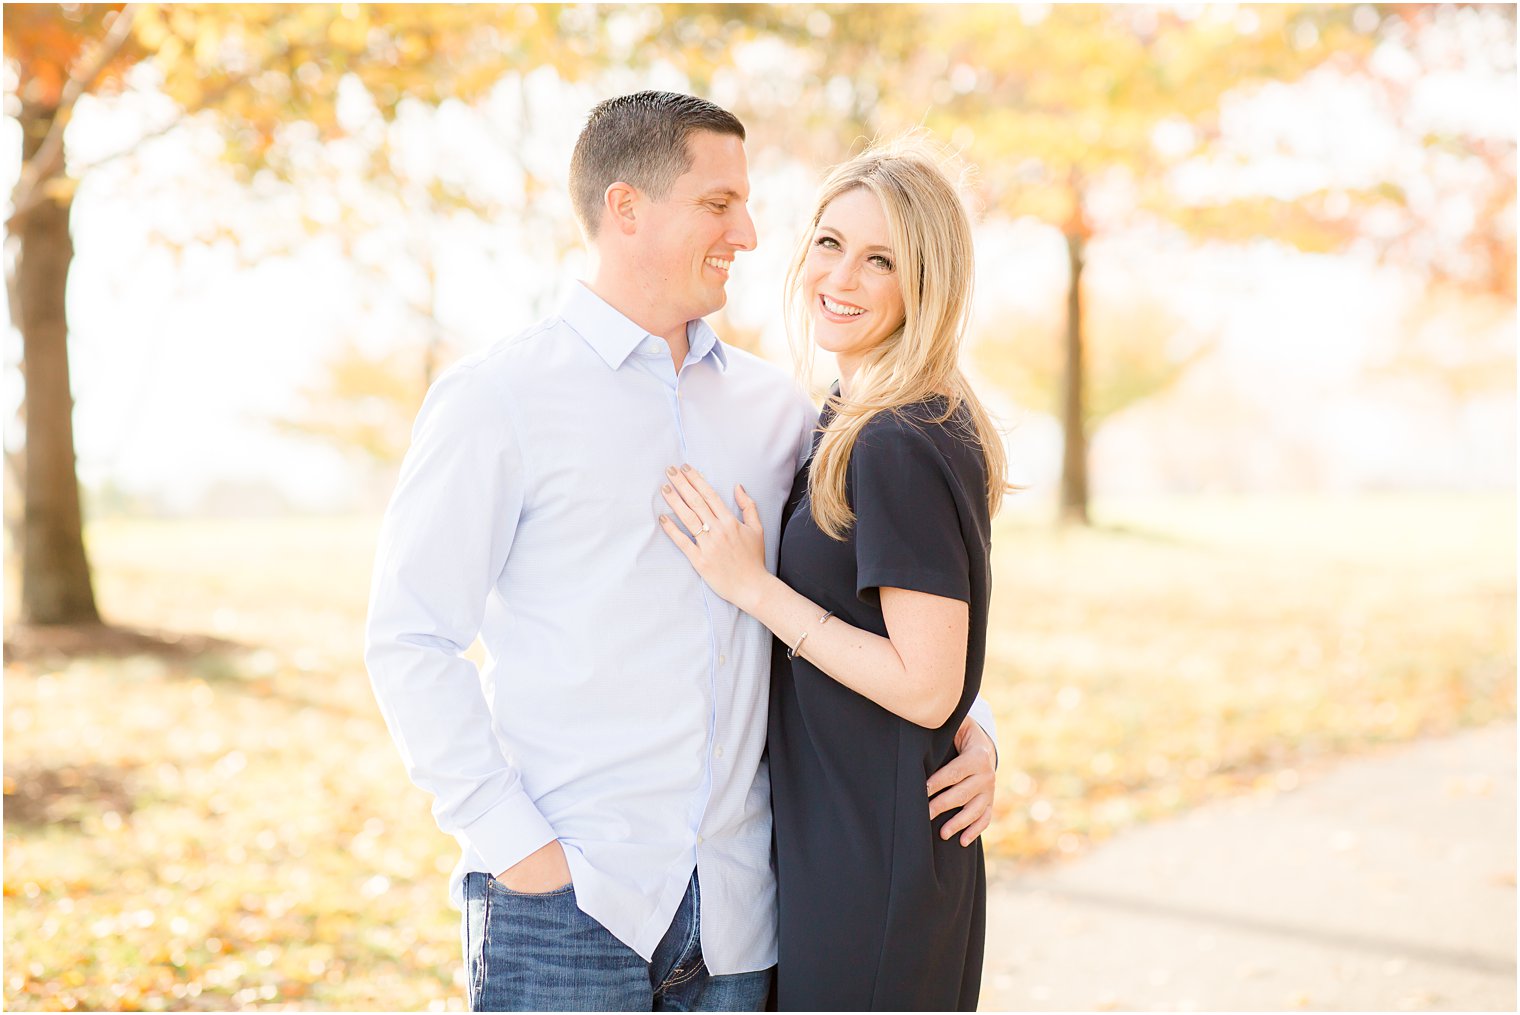 Golden fall glow during Liberty State Park Engagement Session